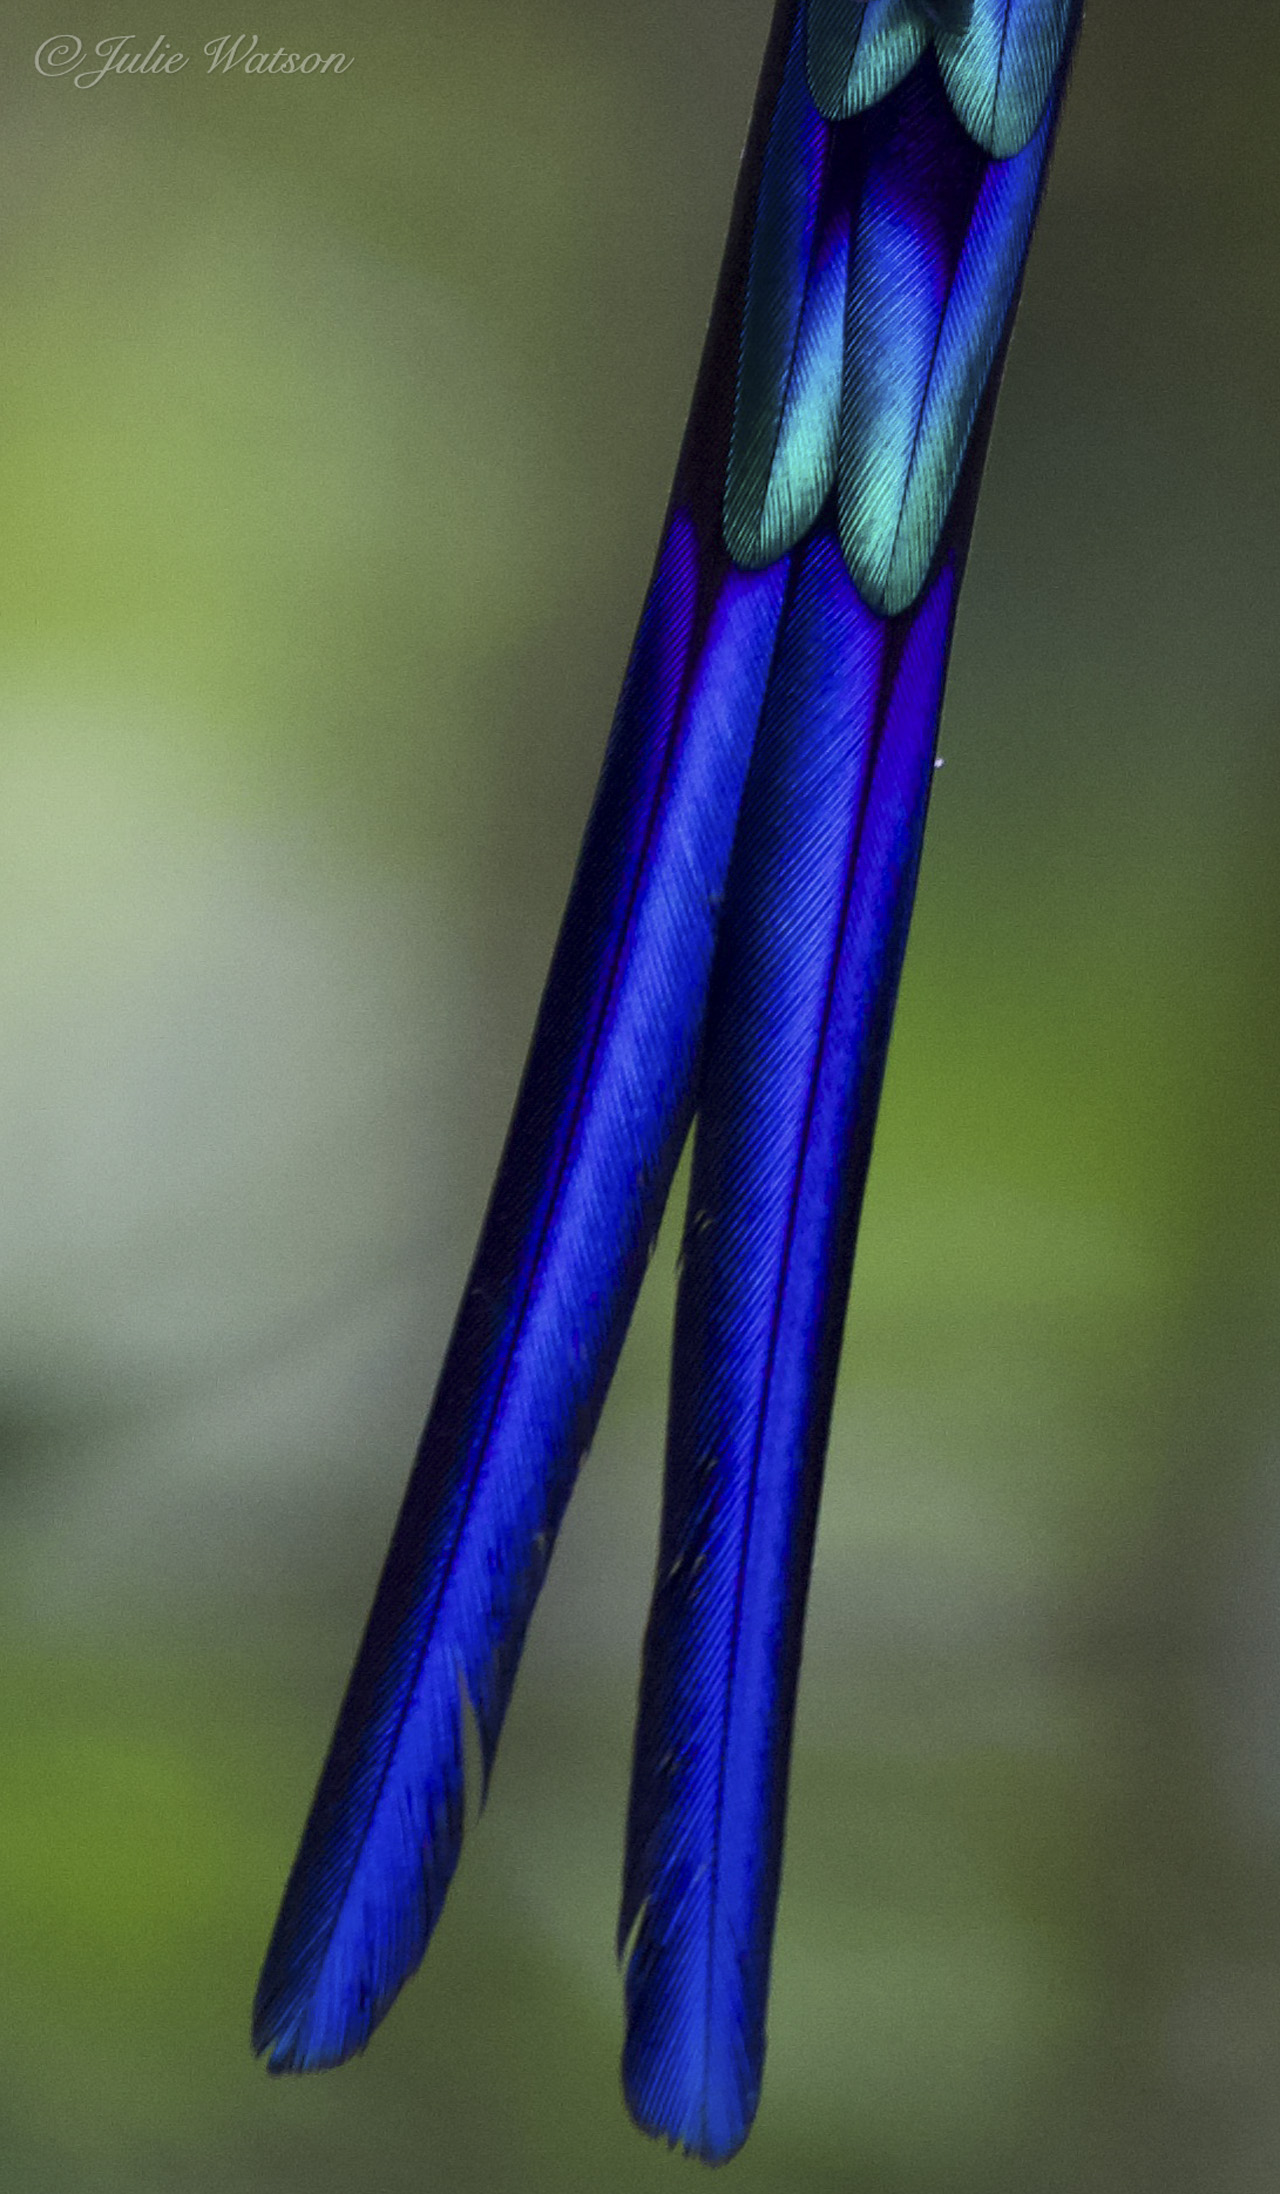 The tail feathers of the Violet-tailed Sylph